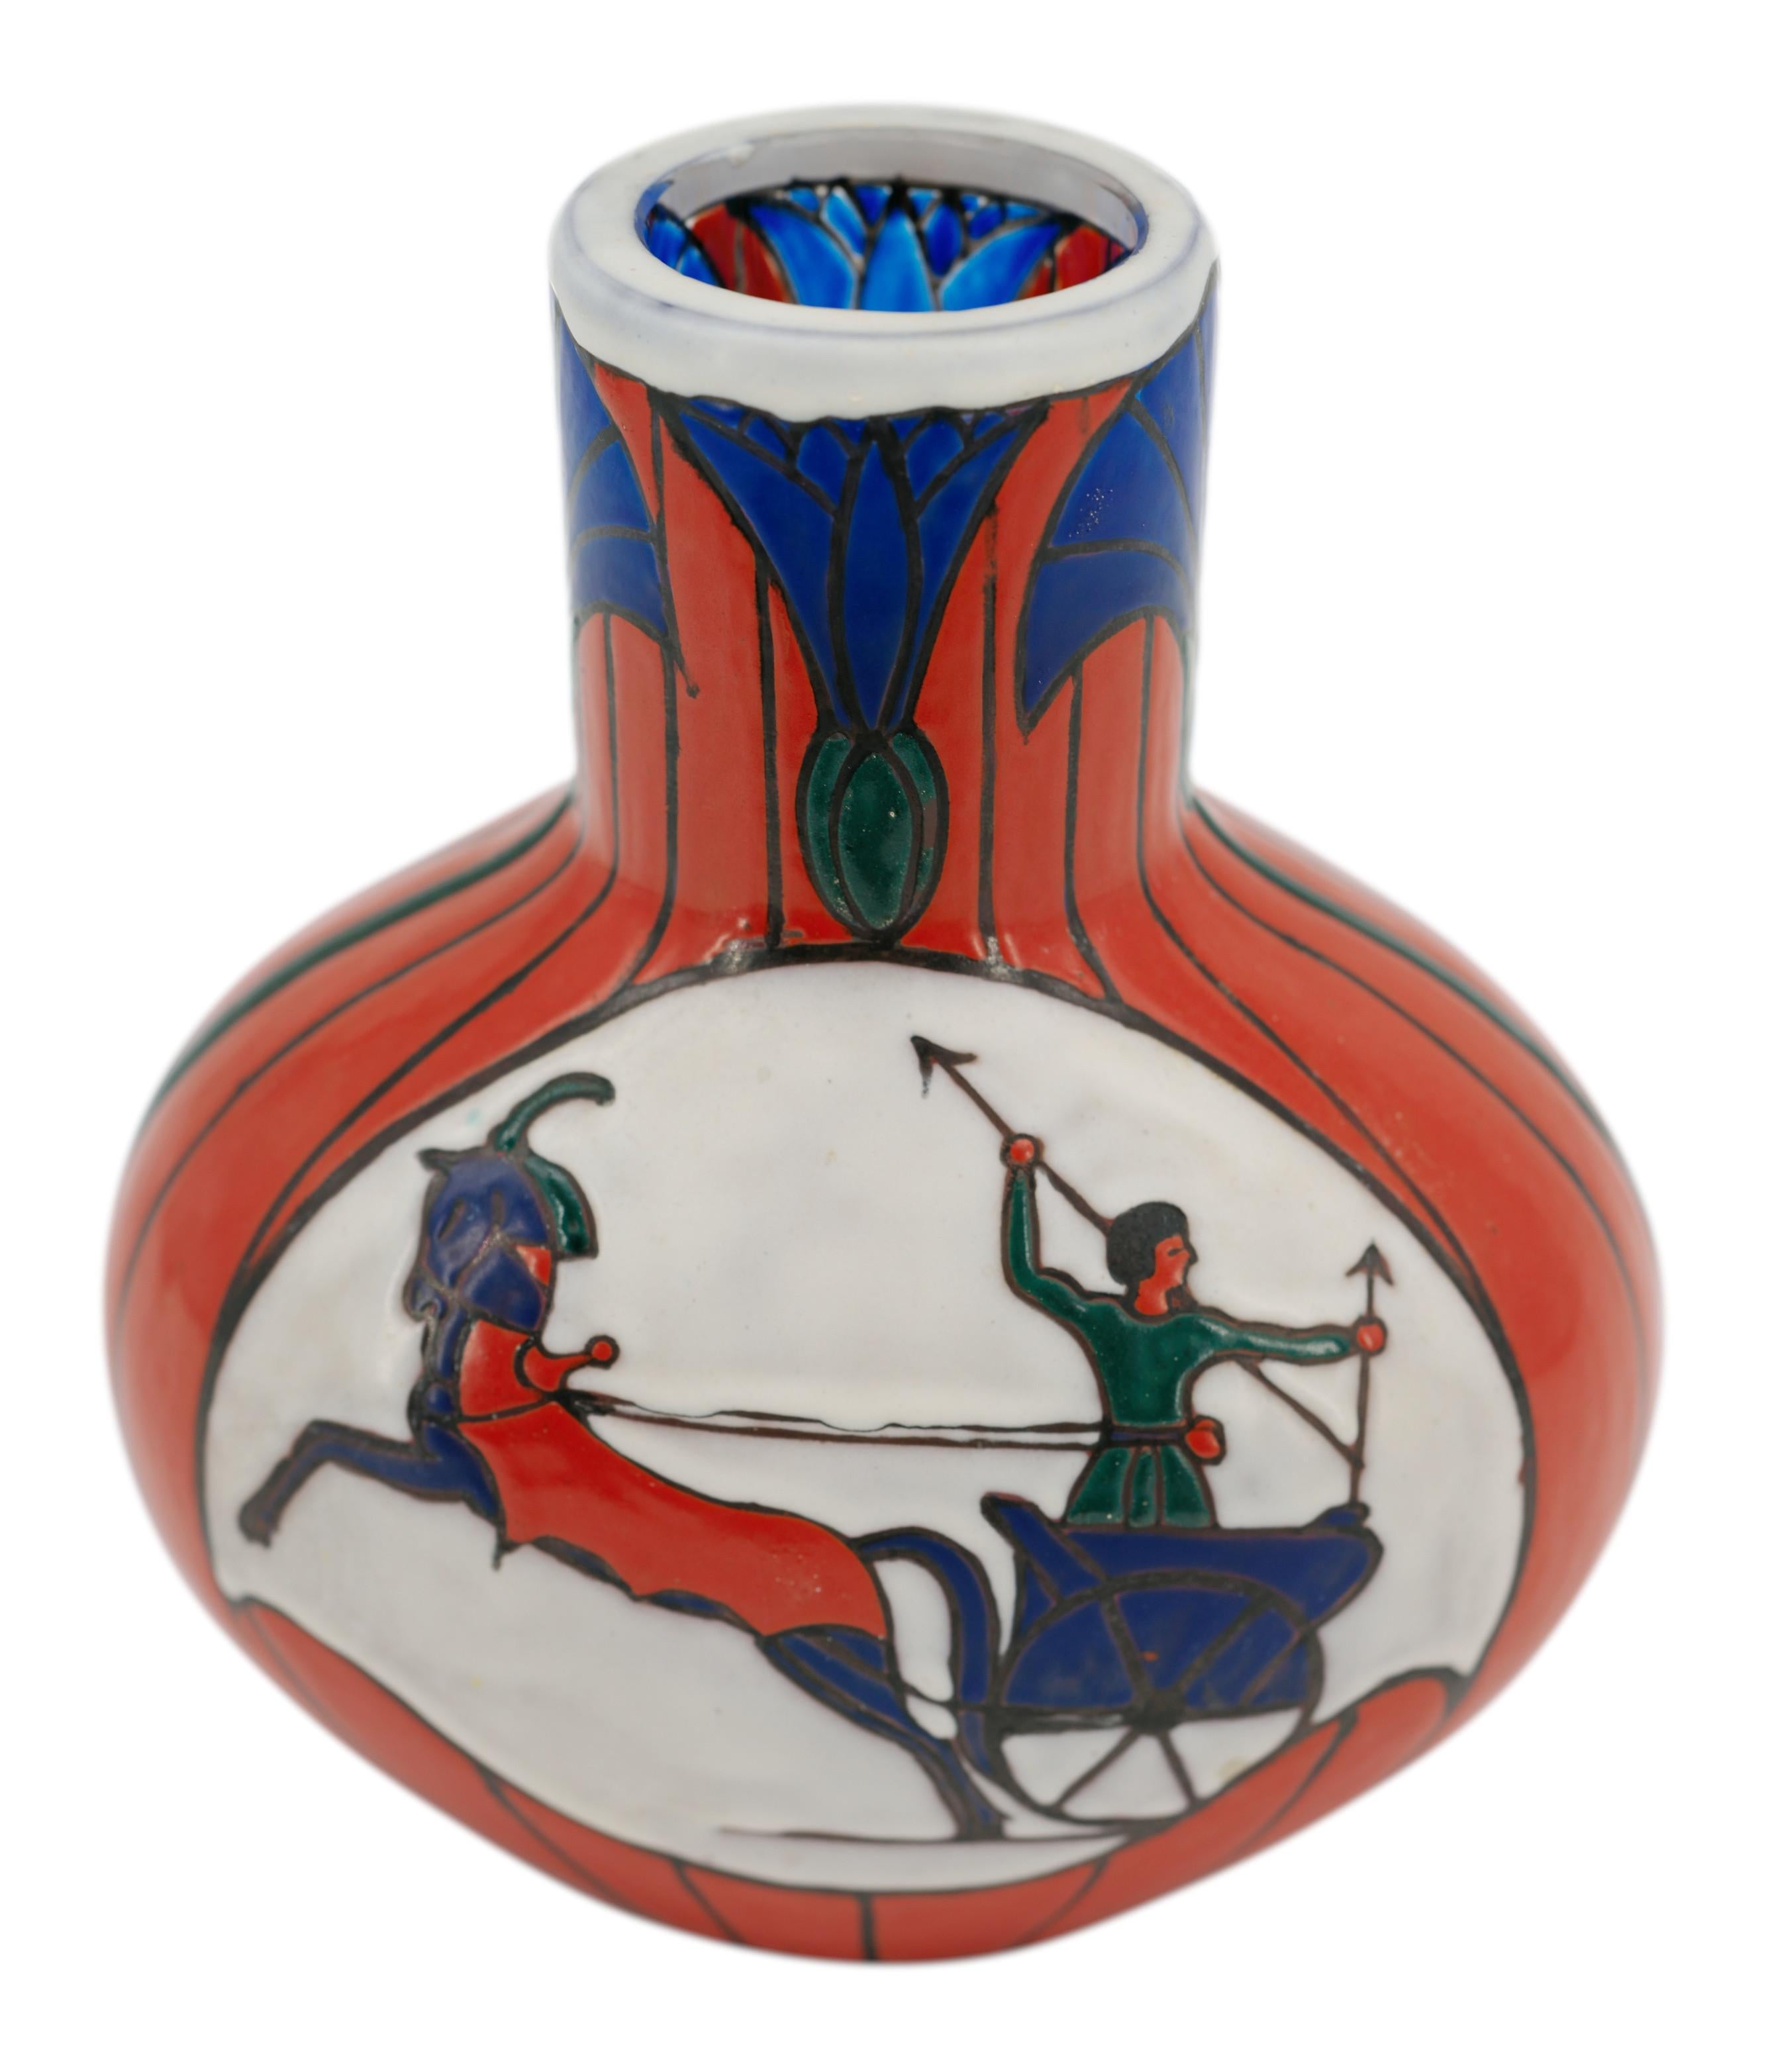 French Art Deco glass vase by LEUNE, 28bis rue du Cardinal Lemoine, Paris, France, 1920s. Fully and heavily enamelled glass gourd vase. Papyrus decor. Egyptian warrior in reserve. Height : 7.8